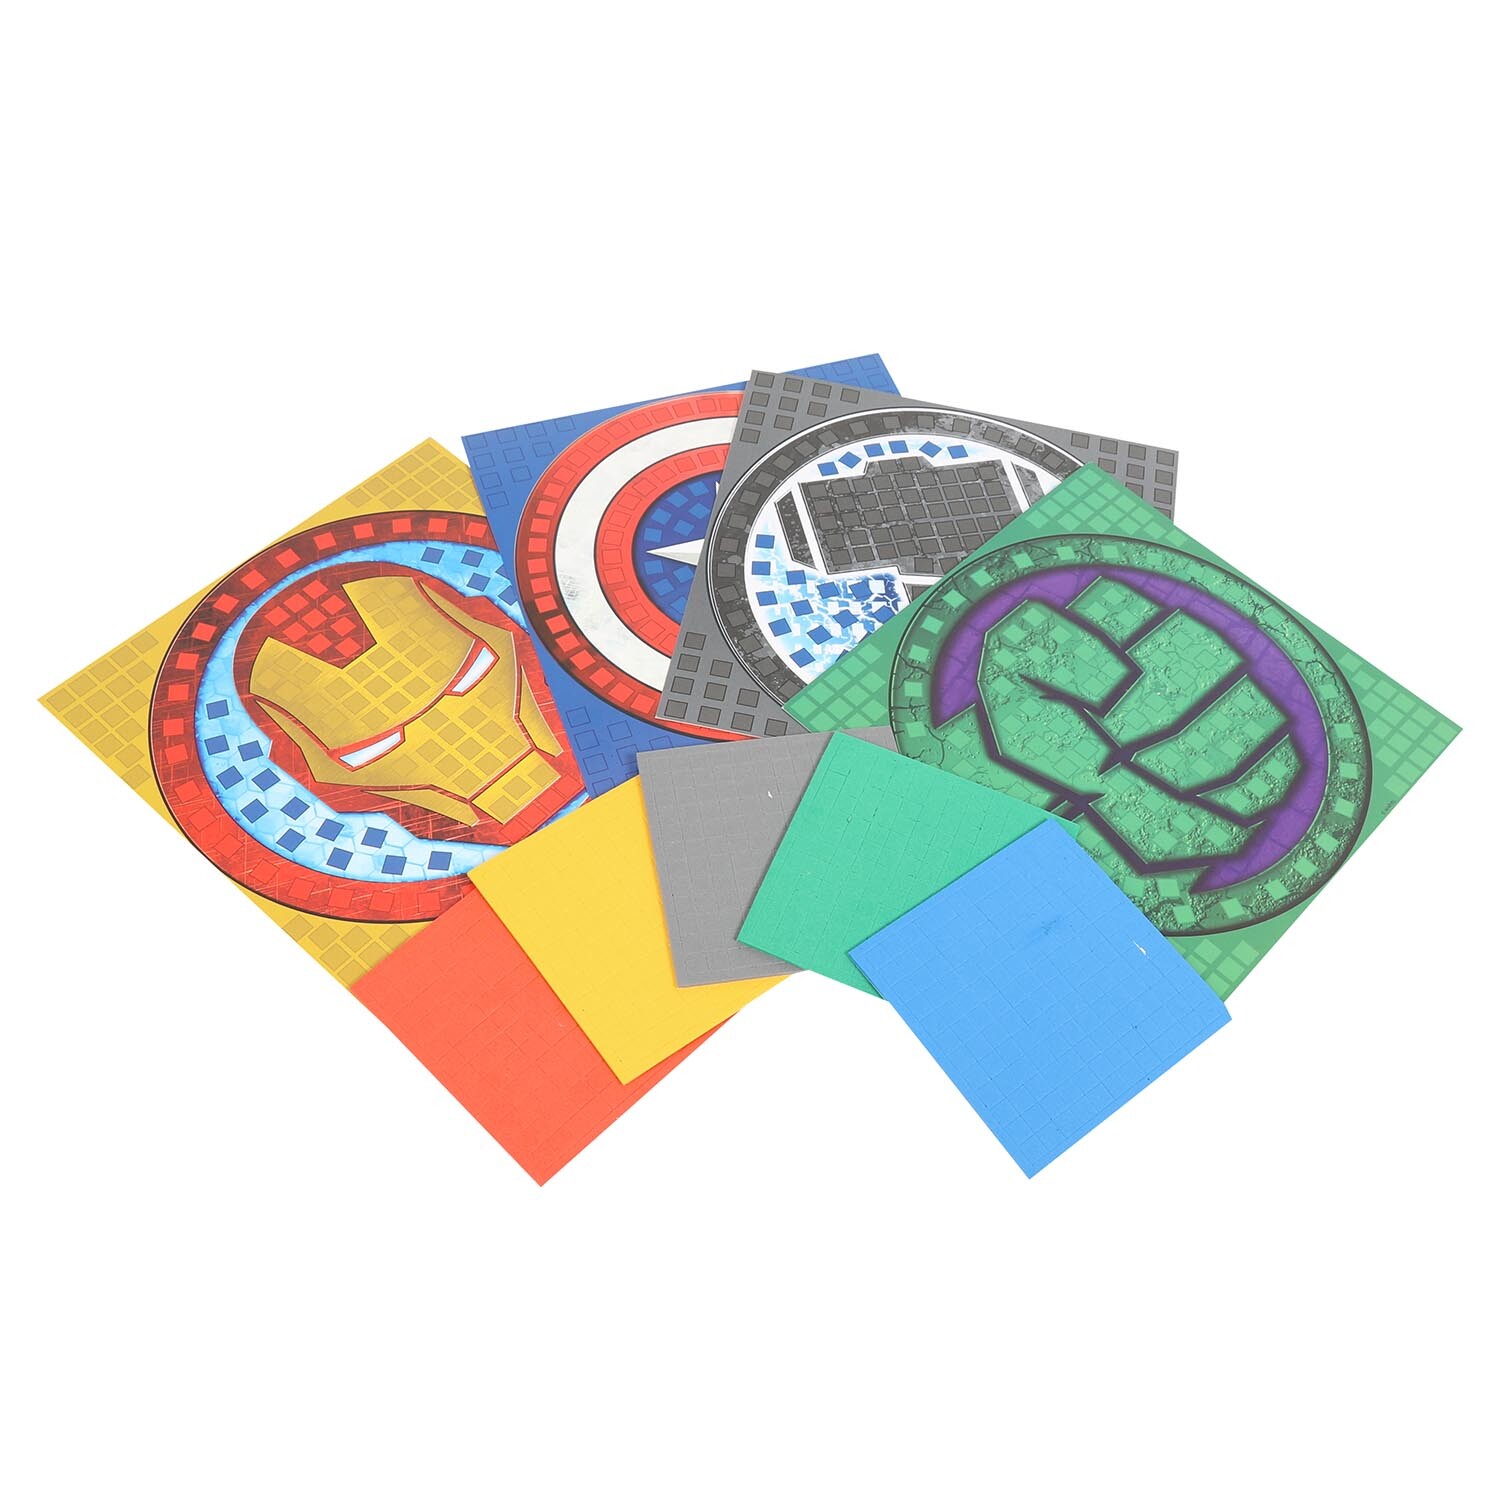 Make Your Own Avengers Foam Mosaic Image 2